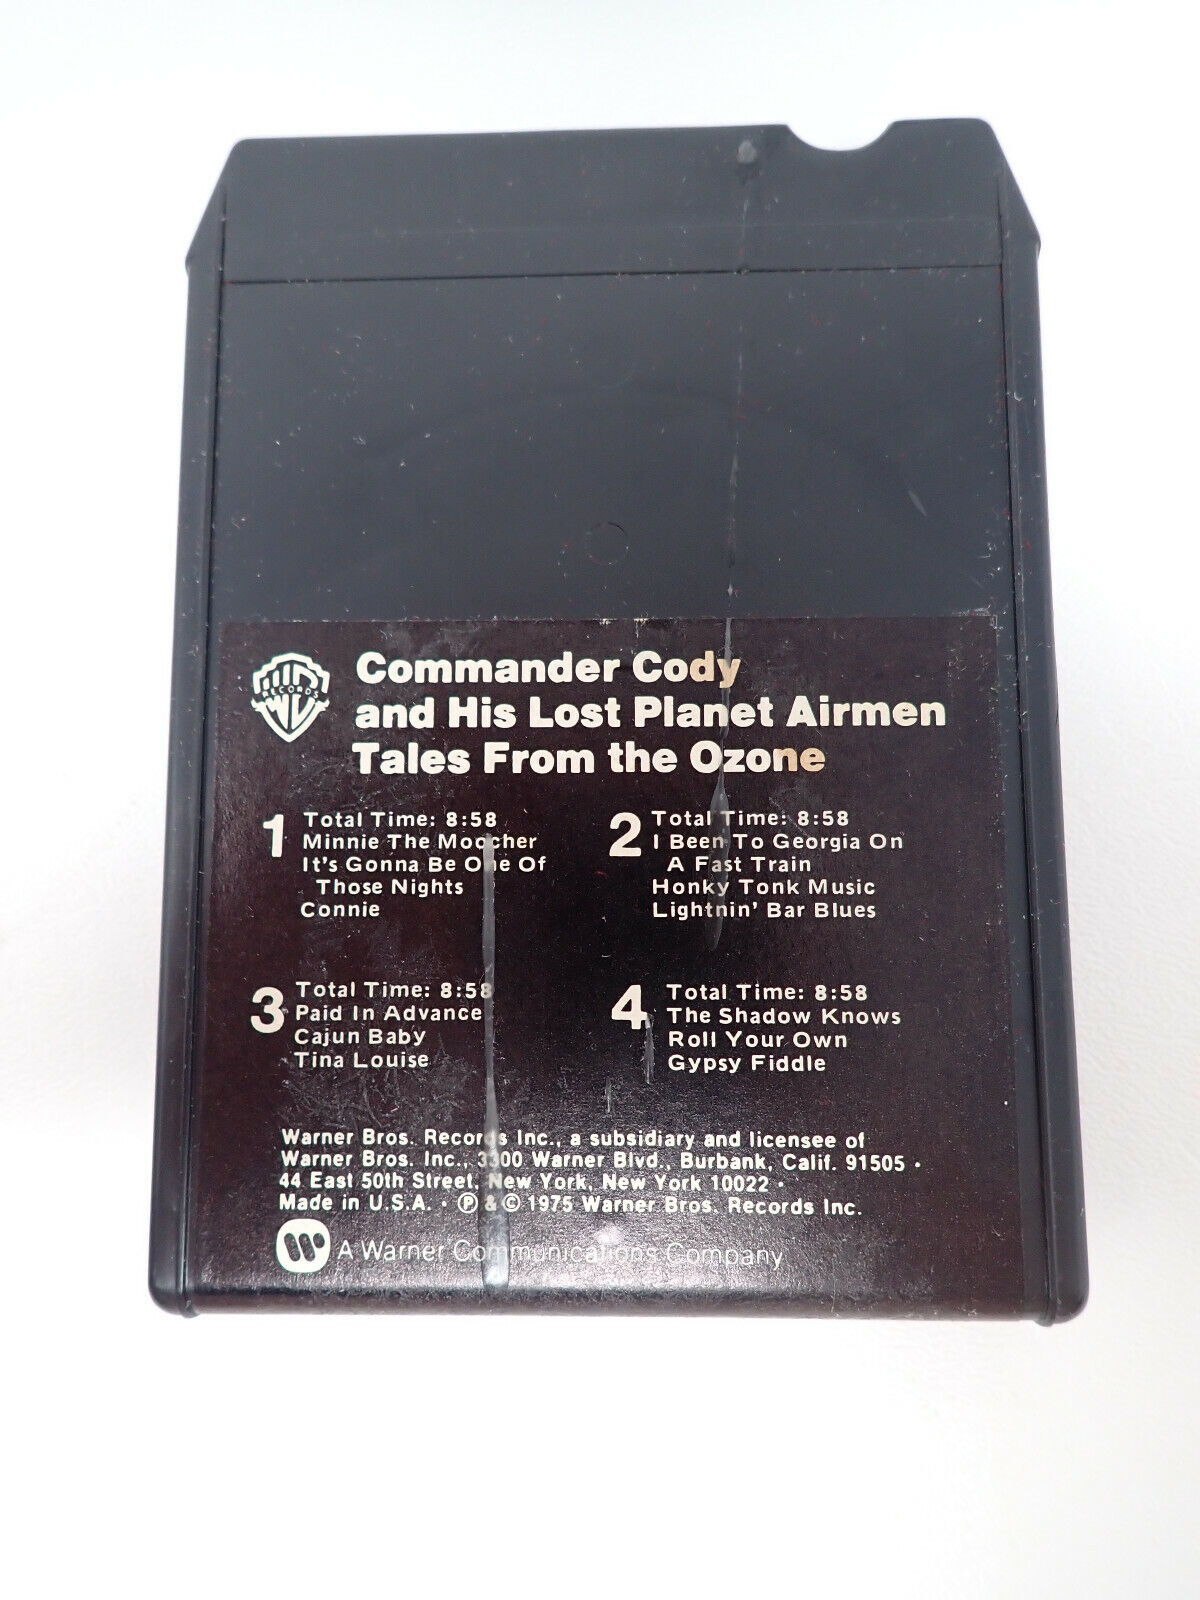 Commander Cody and his Lost Planet Airmen Tales from Ozone Vintage 8 Track Tape